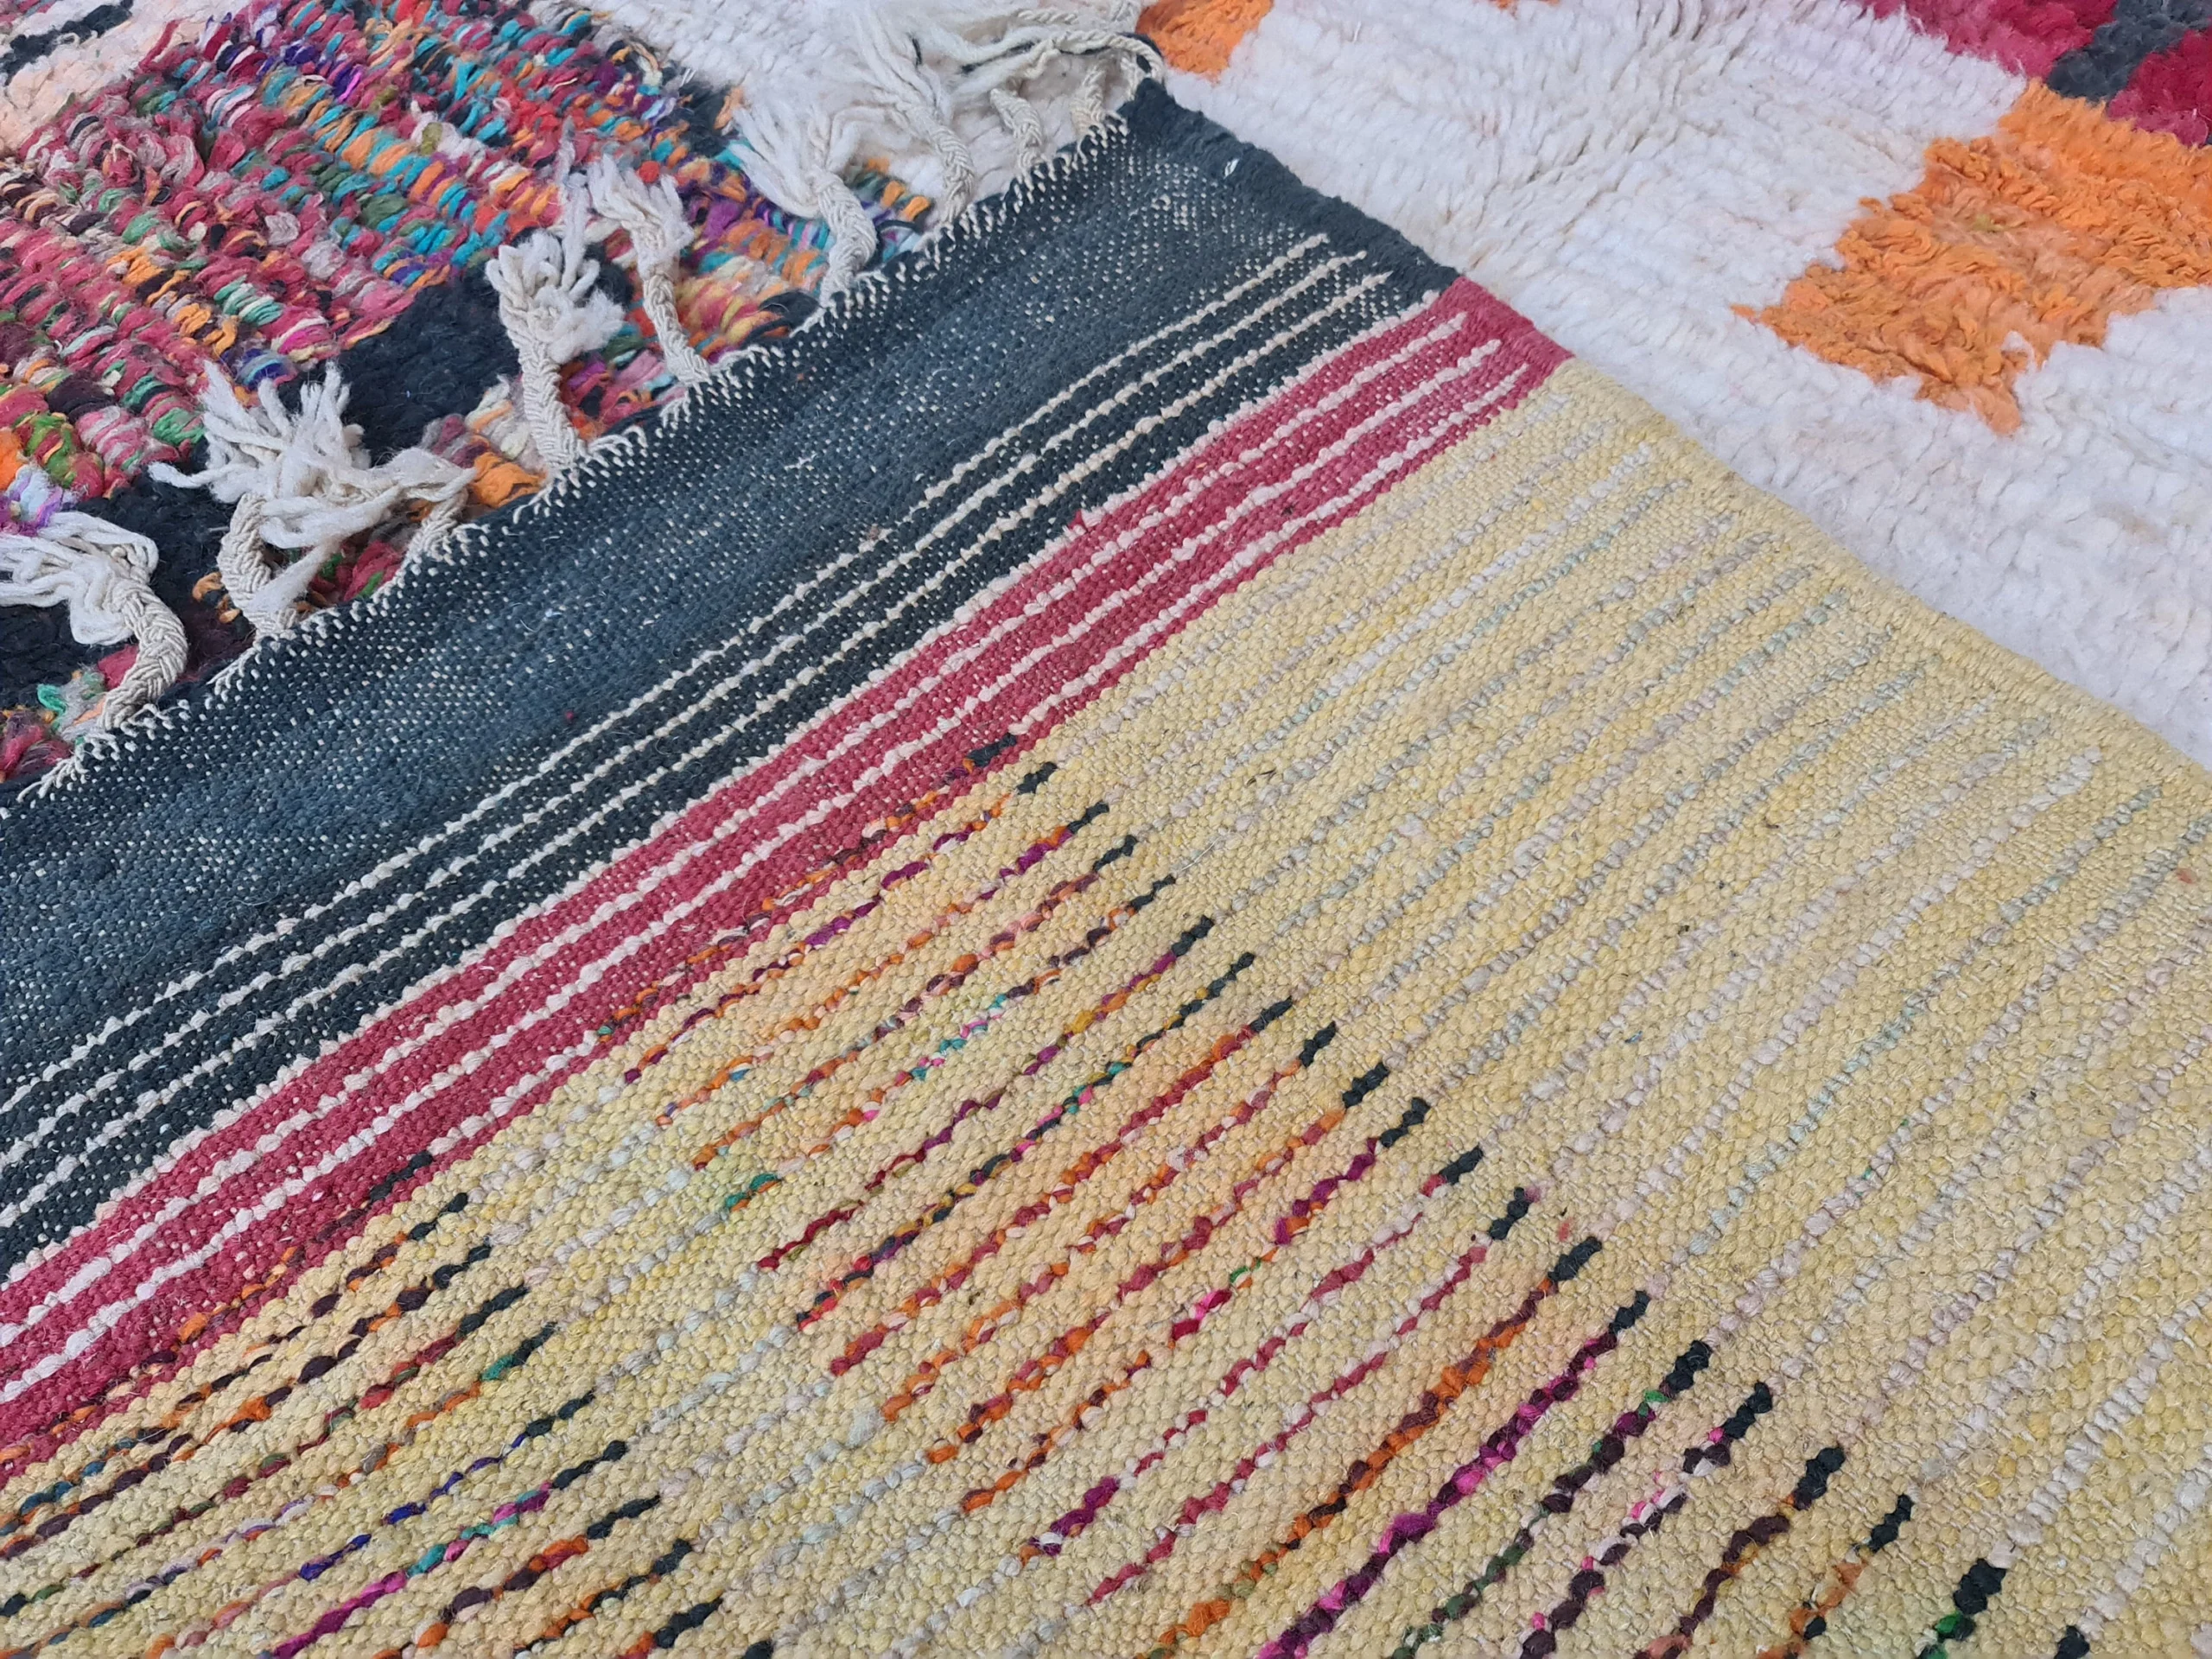 How Do the Colours Used in Moroccan Rugs Reflect the Country’s Landscape and Culture?